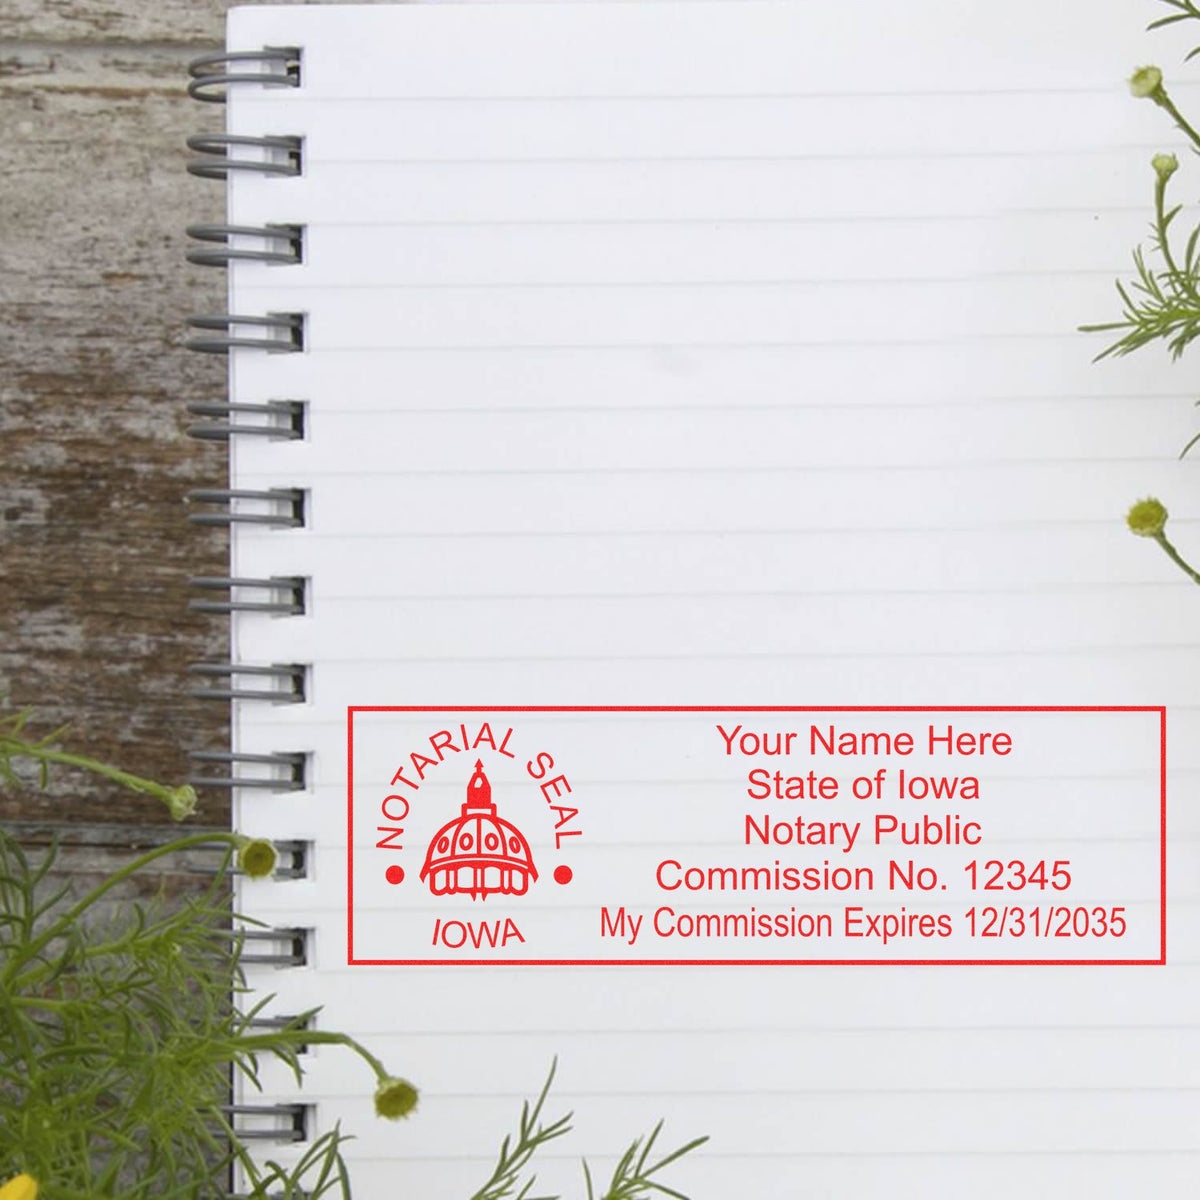 The Heavy-Duty Iowa Rectangular Notary Stamp stamp impression comes to life with a crisp, detailed photo on paper - showcasing true professional quality.